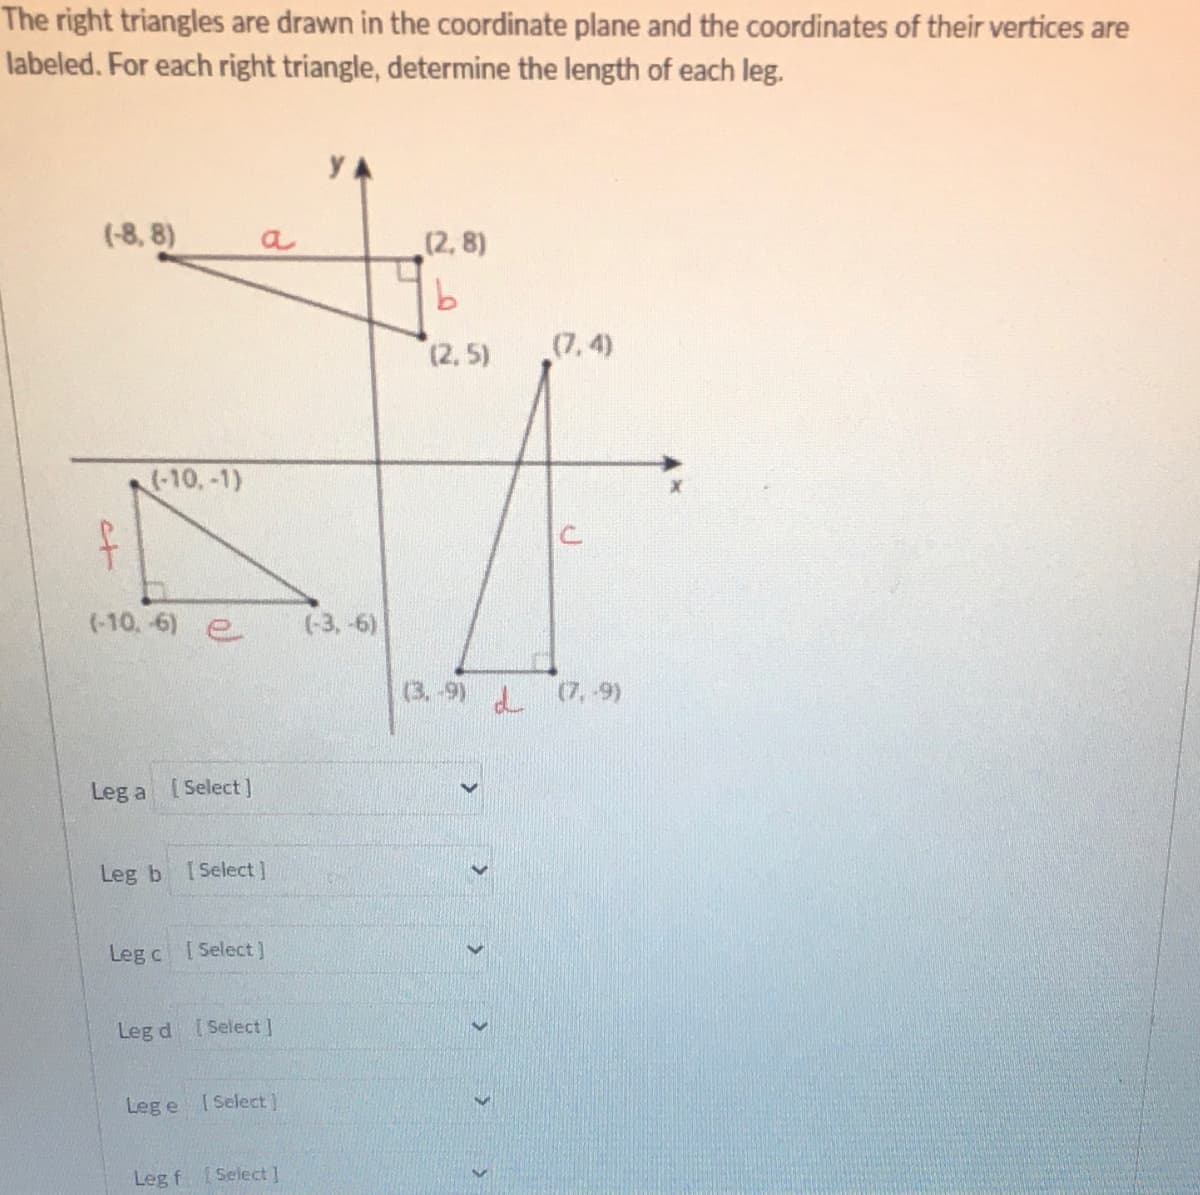 The right triangles are drawn in the coordinate plane and the coordinates of their vertices are
labeled. For each right triangle, determine the length of each leg.
YA
(-8, 8)
a
(2, 8)
(2, 5)
(7, 4)
(-10,-1)
(-10,-6) e
(-3,-6)
(3.-9) (7, 9)
Leg a [Select]
Leg b
[ Select ]
Leg c [Select)
Leg d Select]
Leg e
I Select)
Leg f Select ]
t
